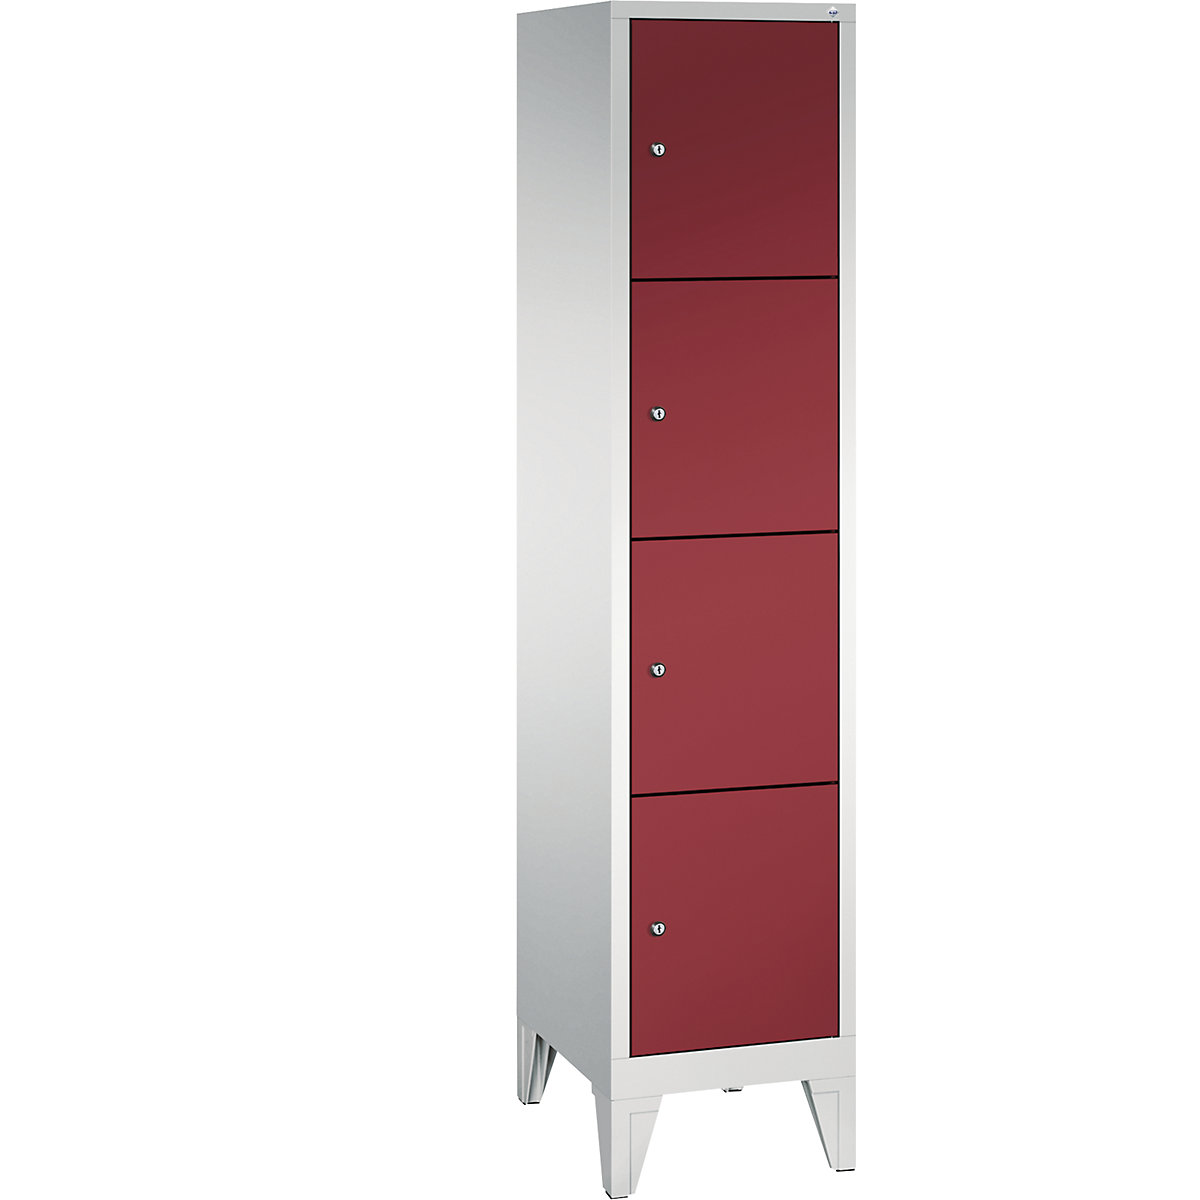 CLASSIC locker unit with feet – C+P, 1 compartment, 4 shelf compartments, compartment width 400 mm, light grey / ruby red-9